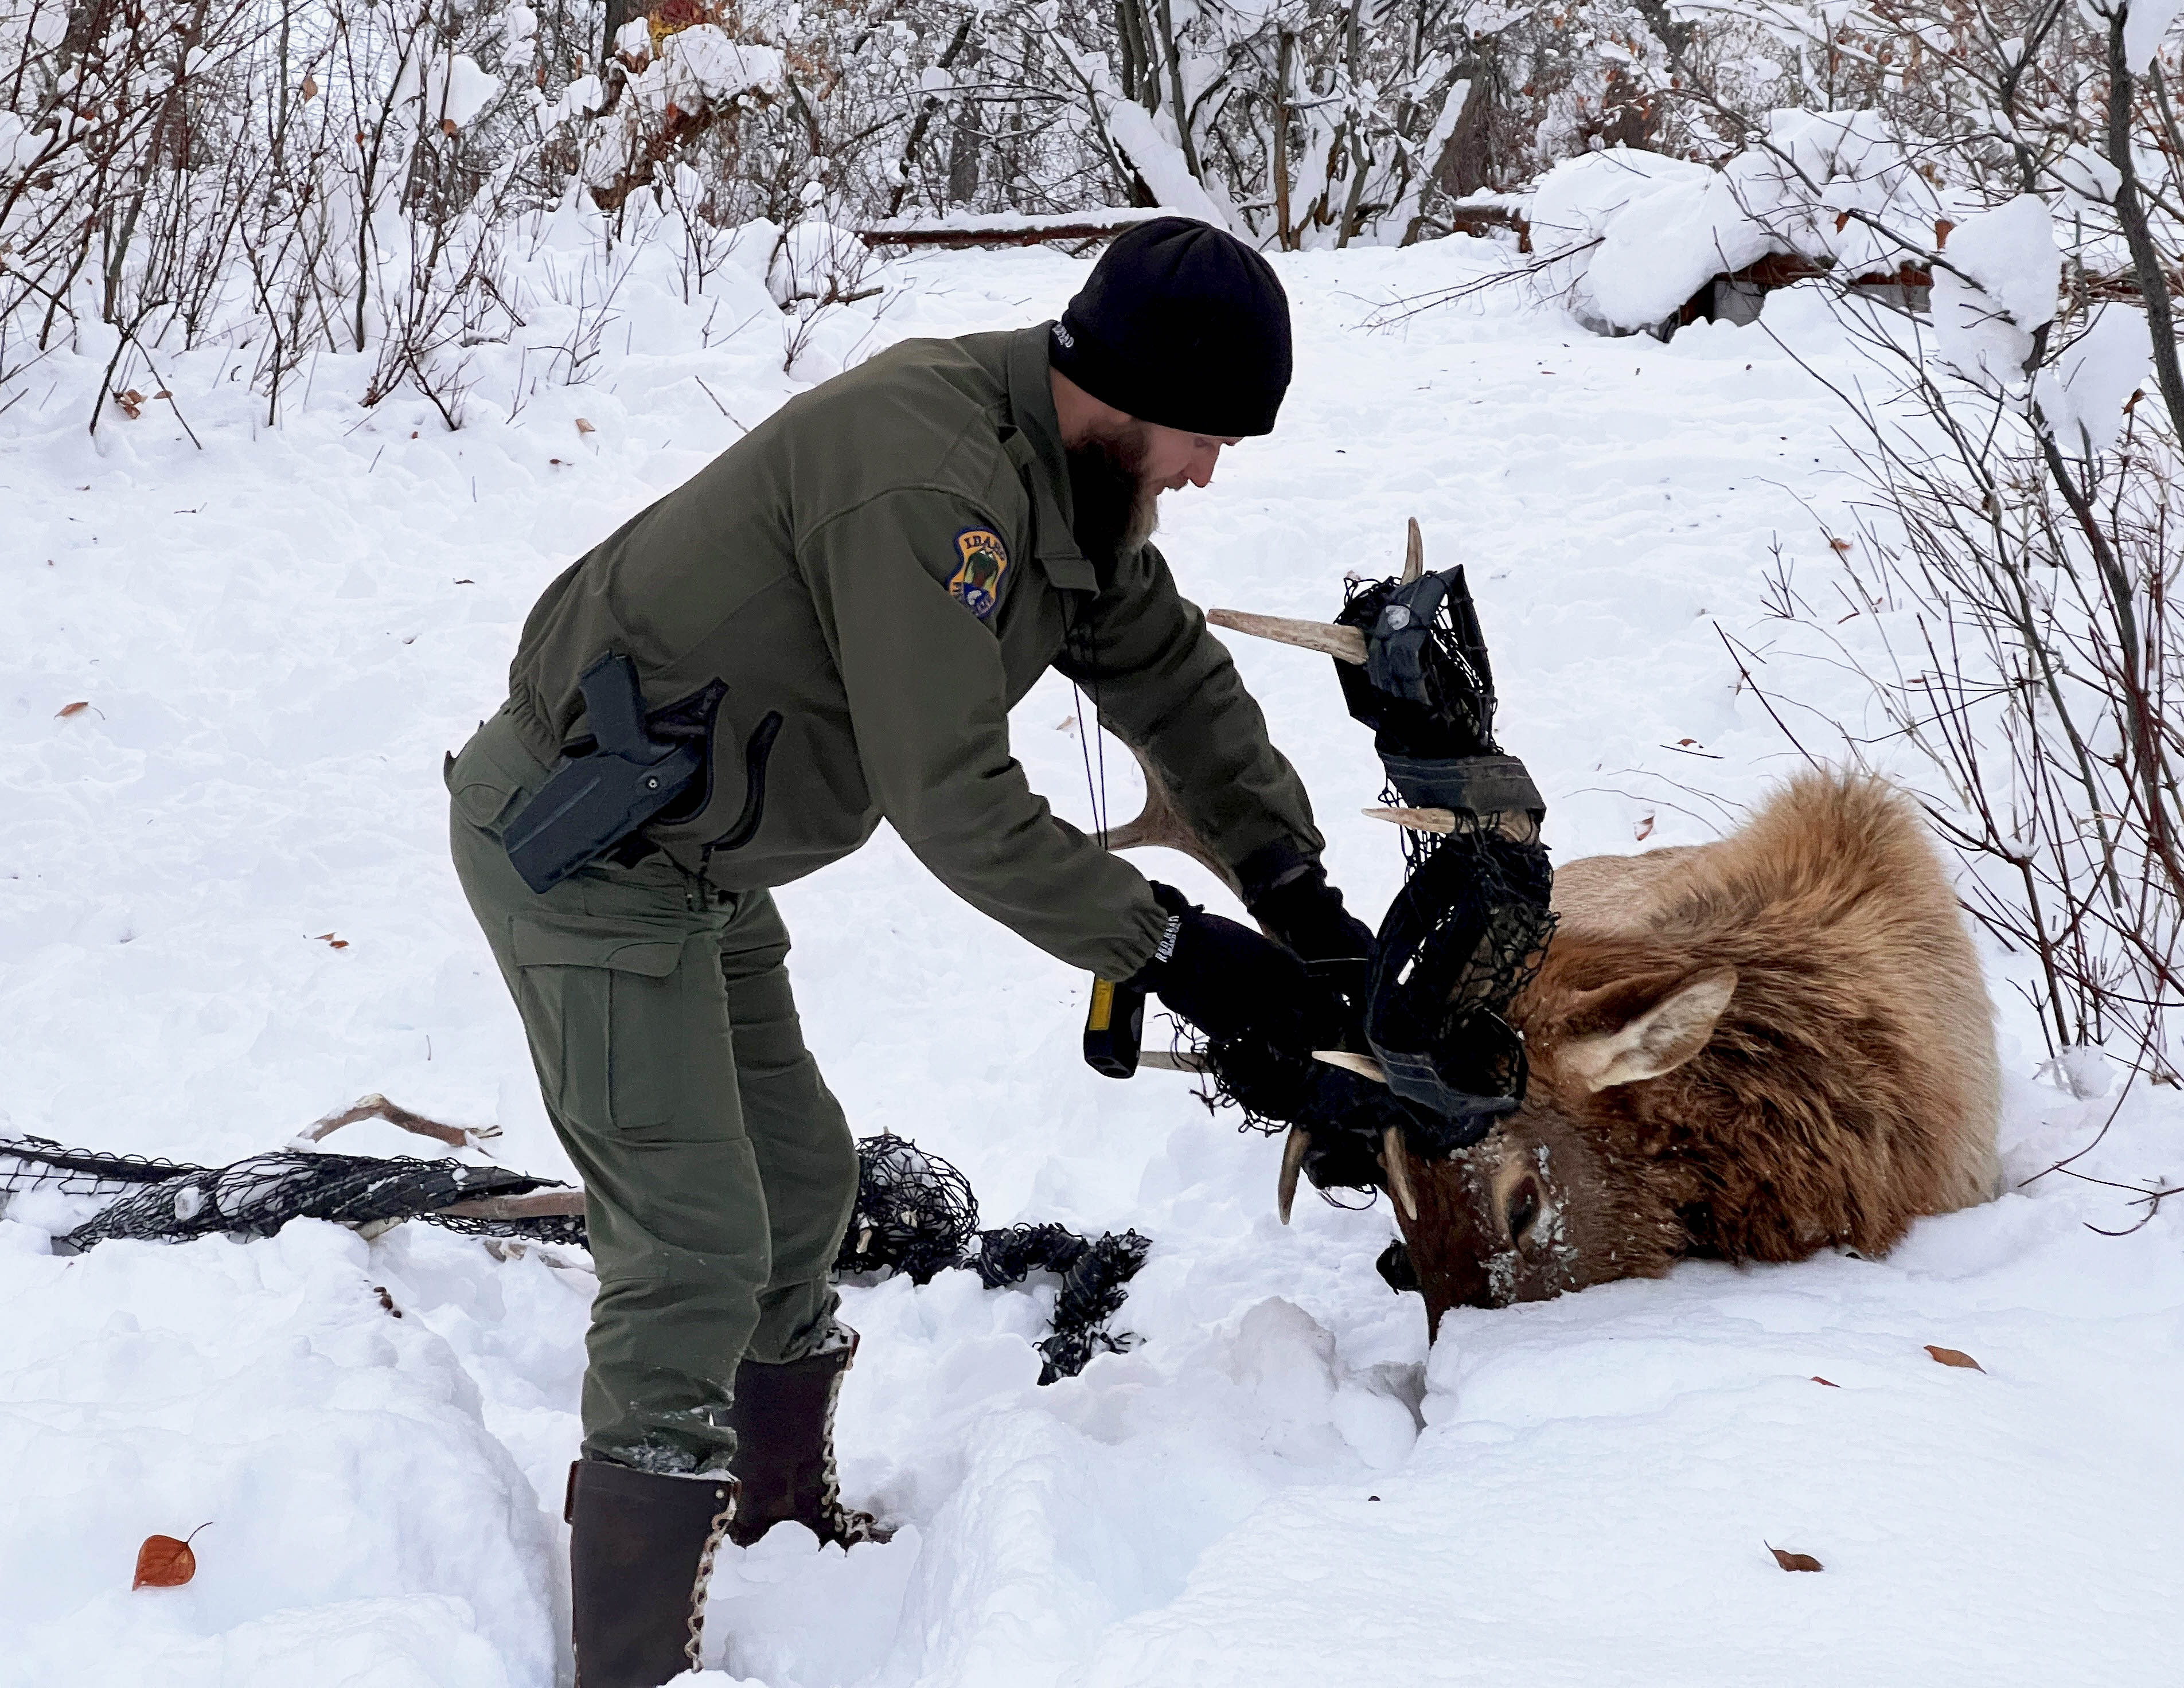 Senior Conservation Officer Wampler works to remove a tennis court net from the antlers of a bull elk.